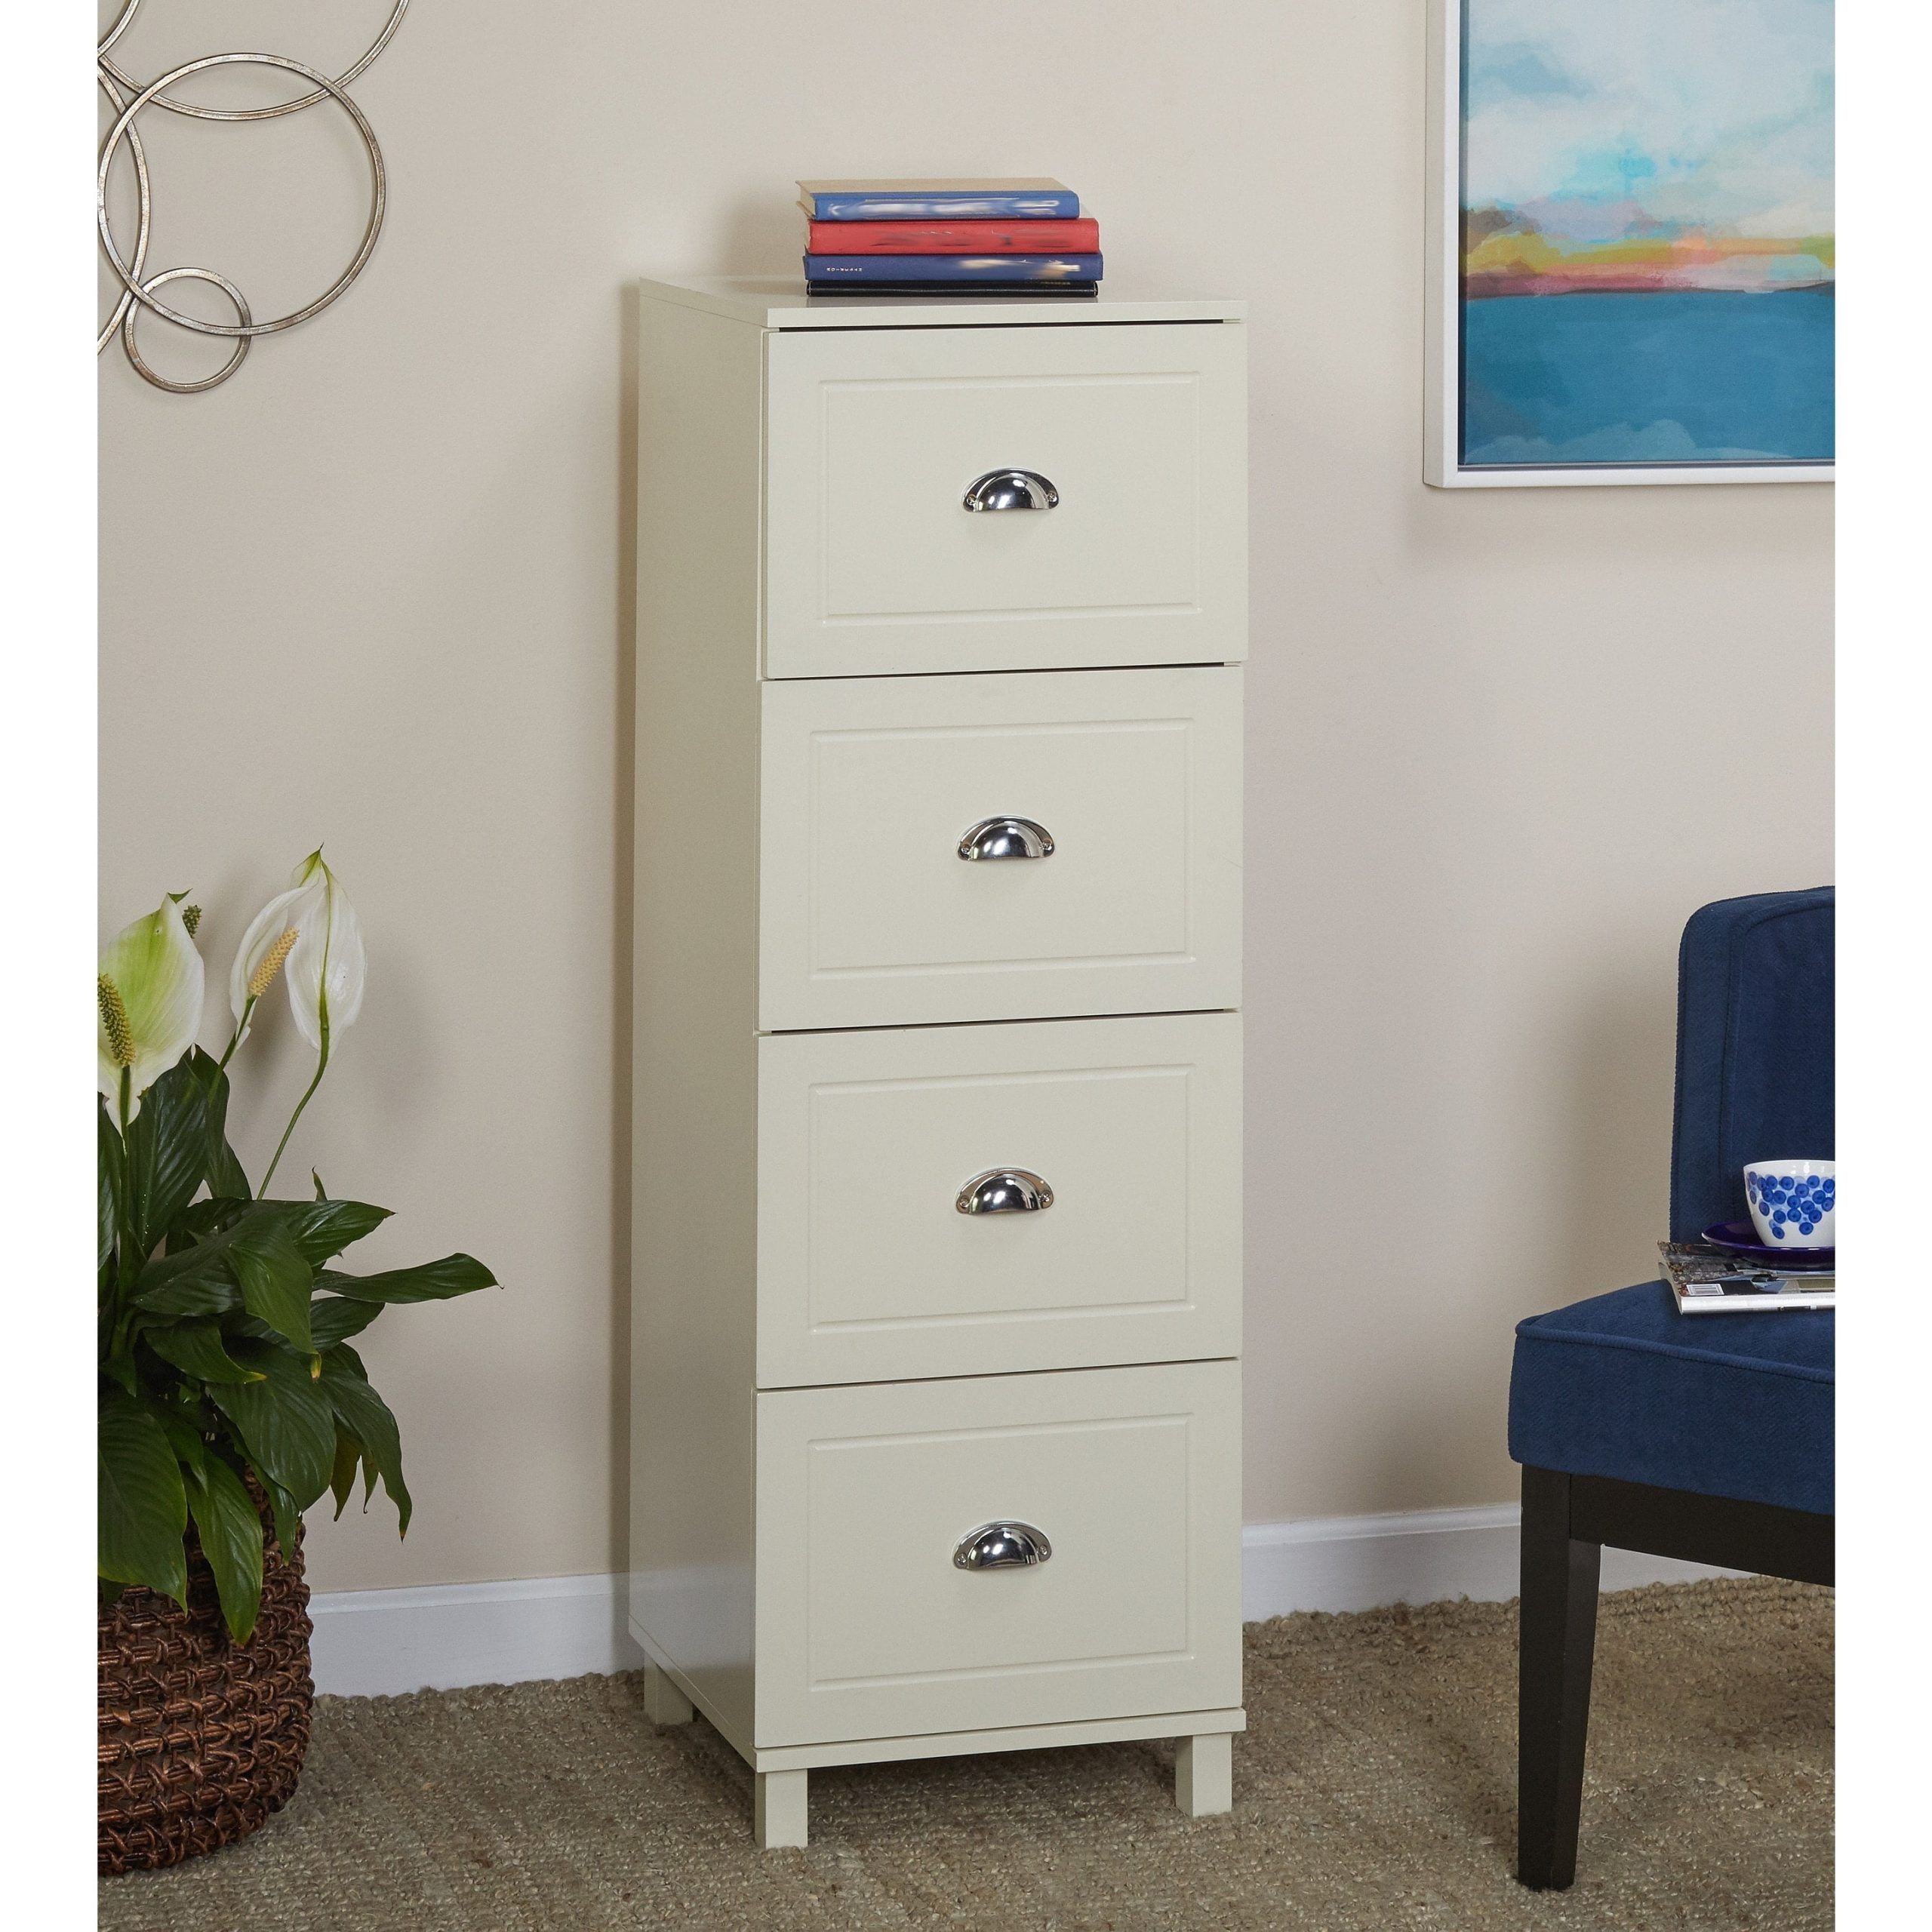 Favorite Wood Cabinet With Drawers In Bradley 4 Drawer Vertical Wood Filing Cabinet, White – Walmart (View 6 of 15)